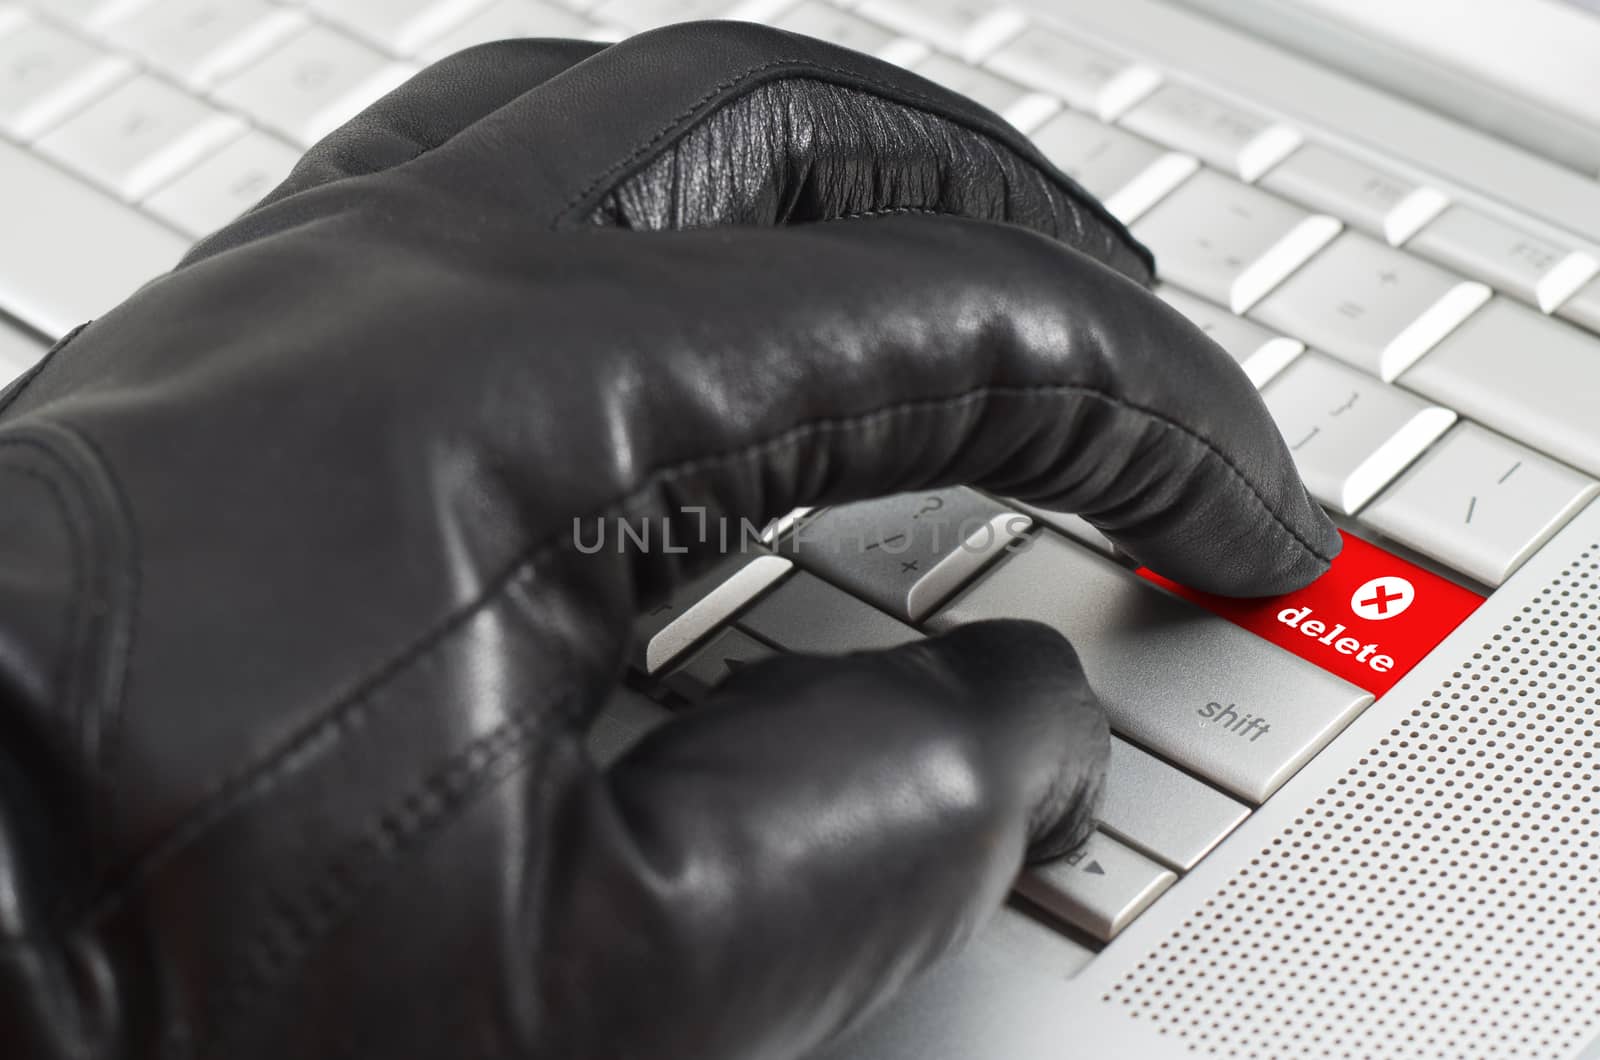 Online delete concept with hand wearing black leather glove pressing delete key